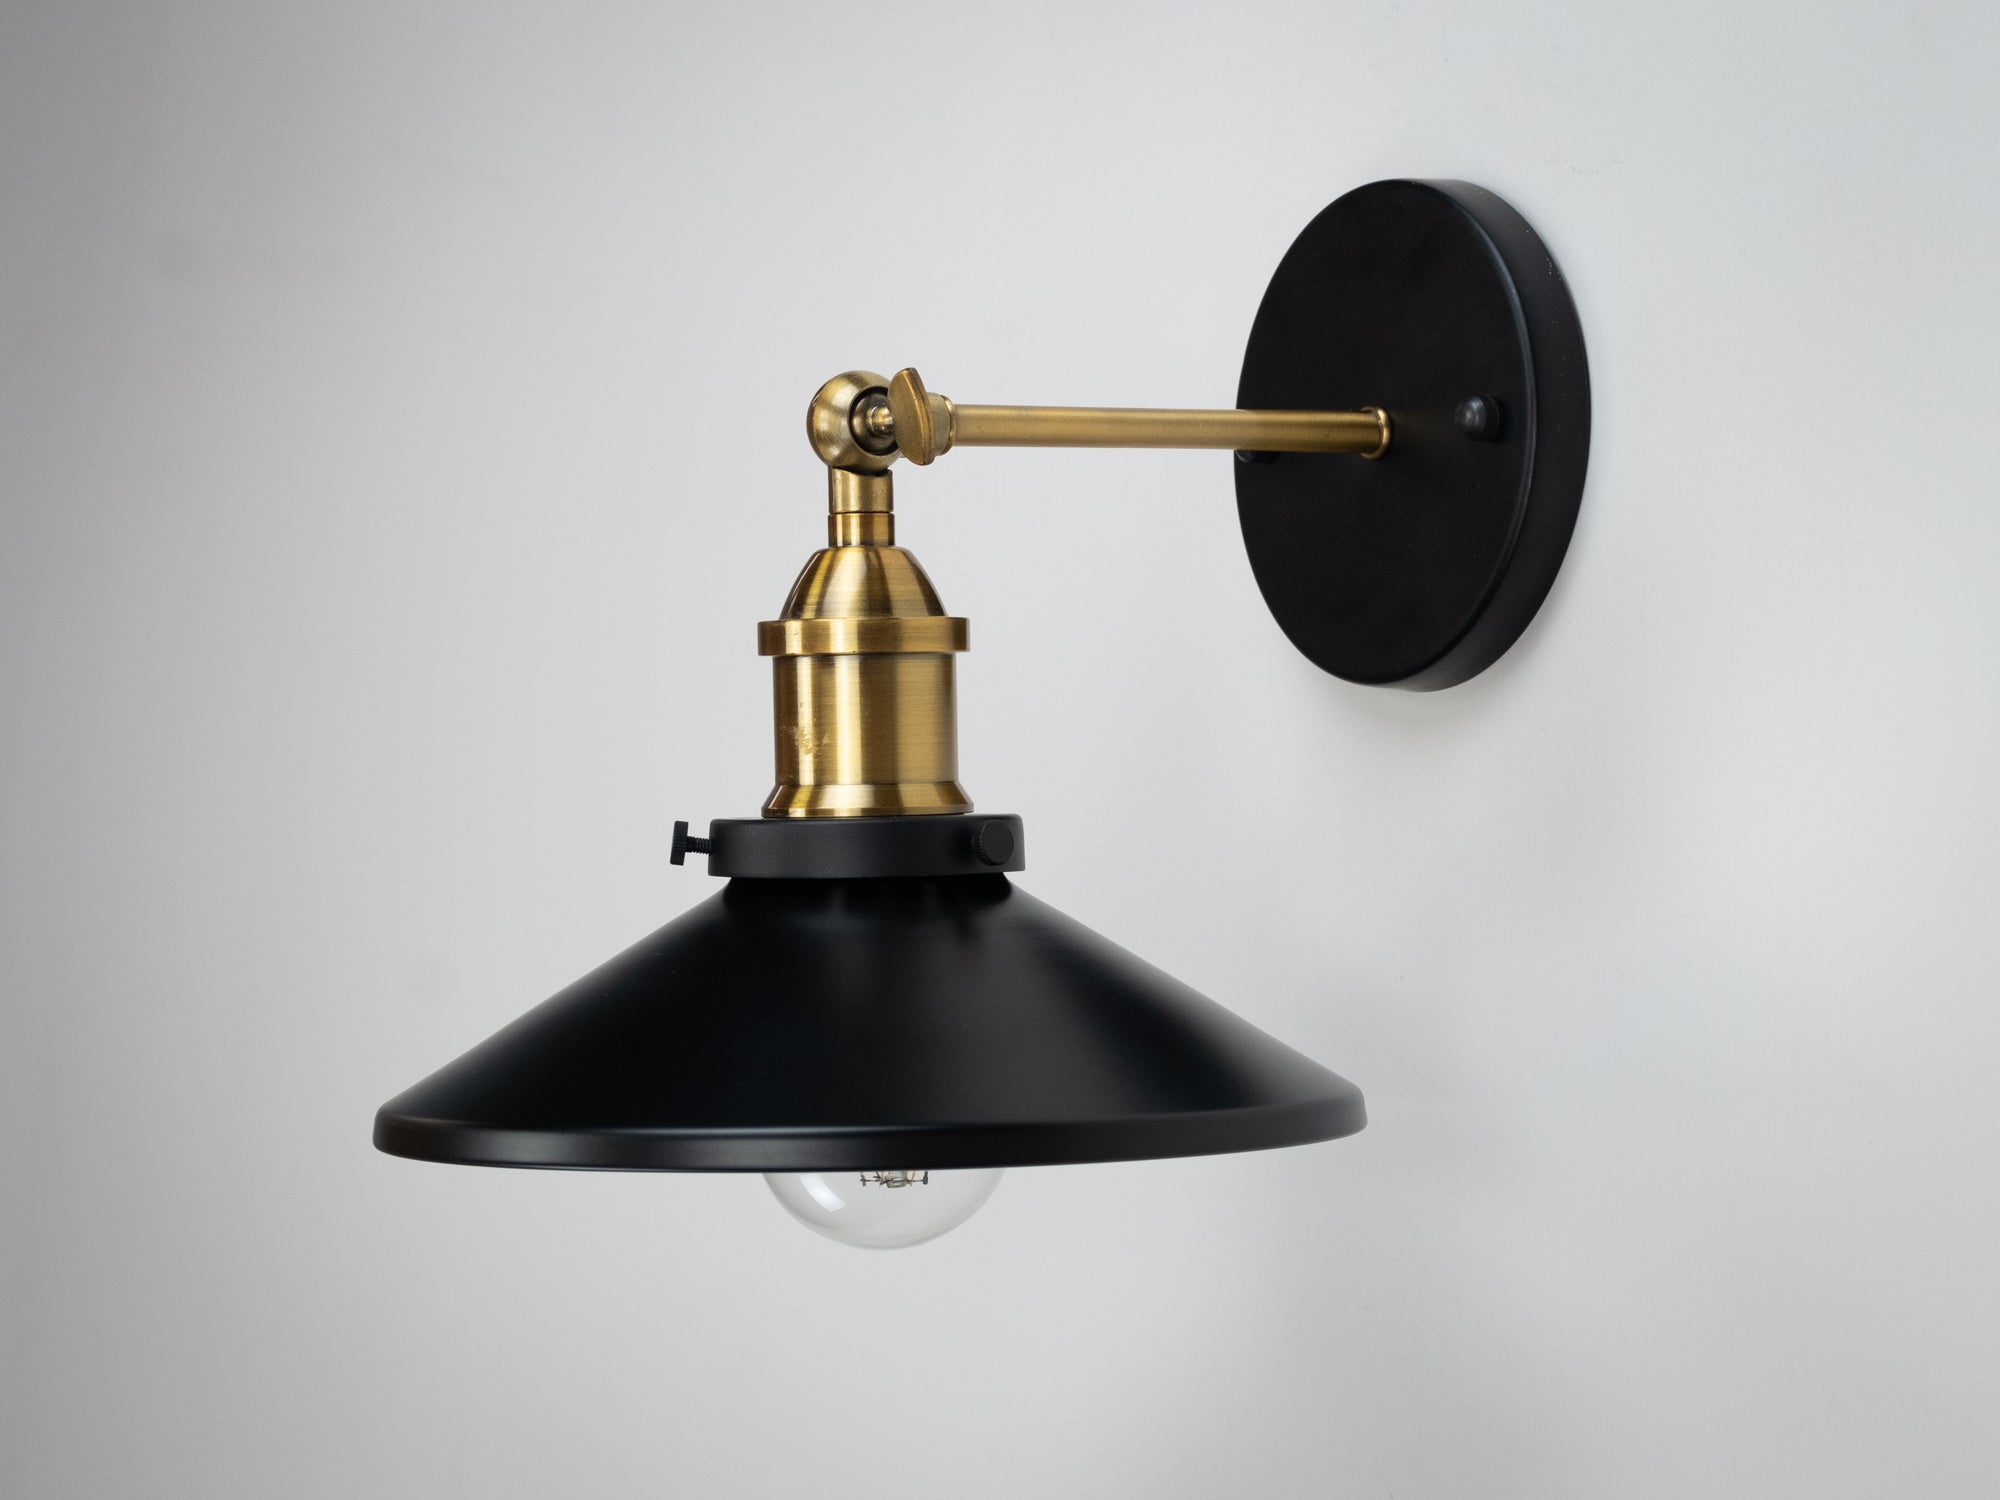 Brass Vintage Wall Light with Black Metal Shade - img5db25bc060568